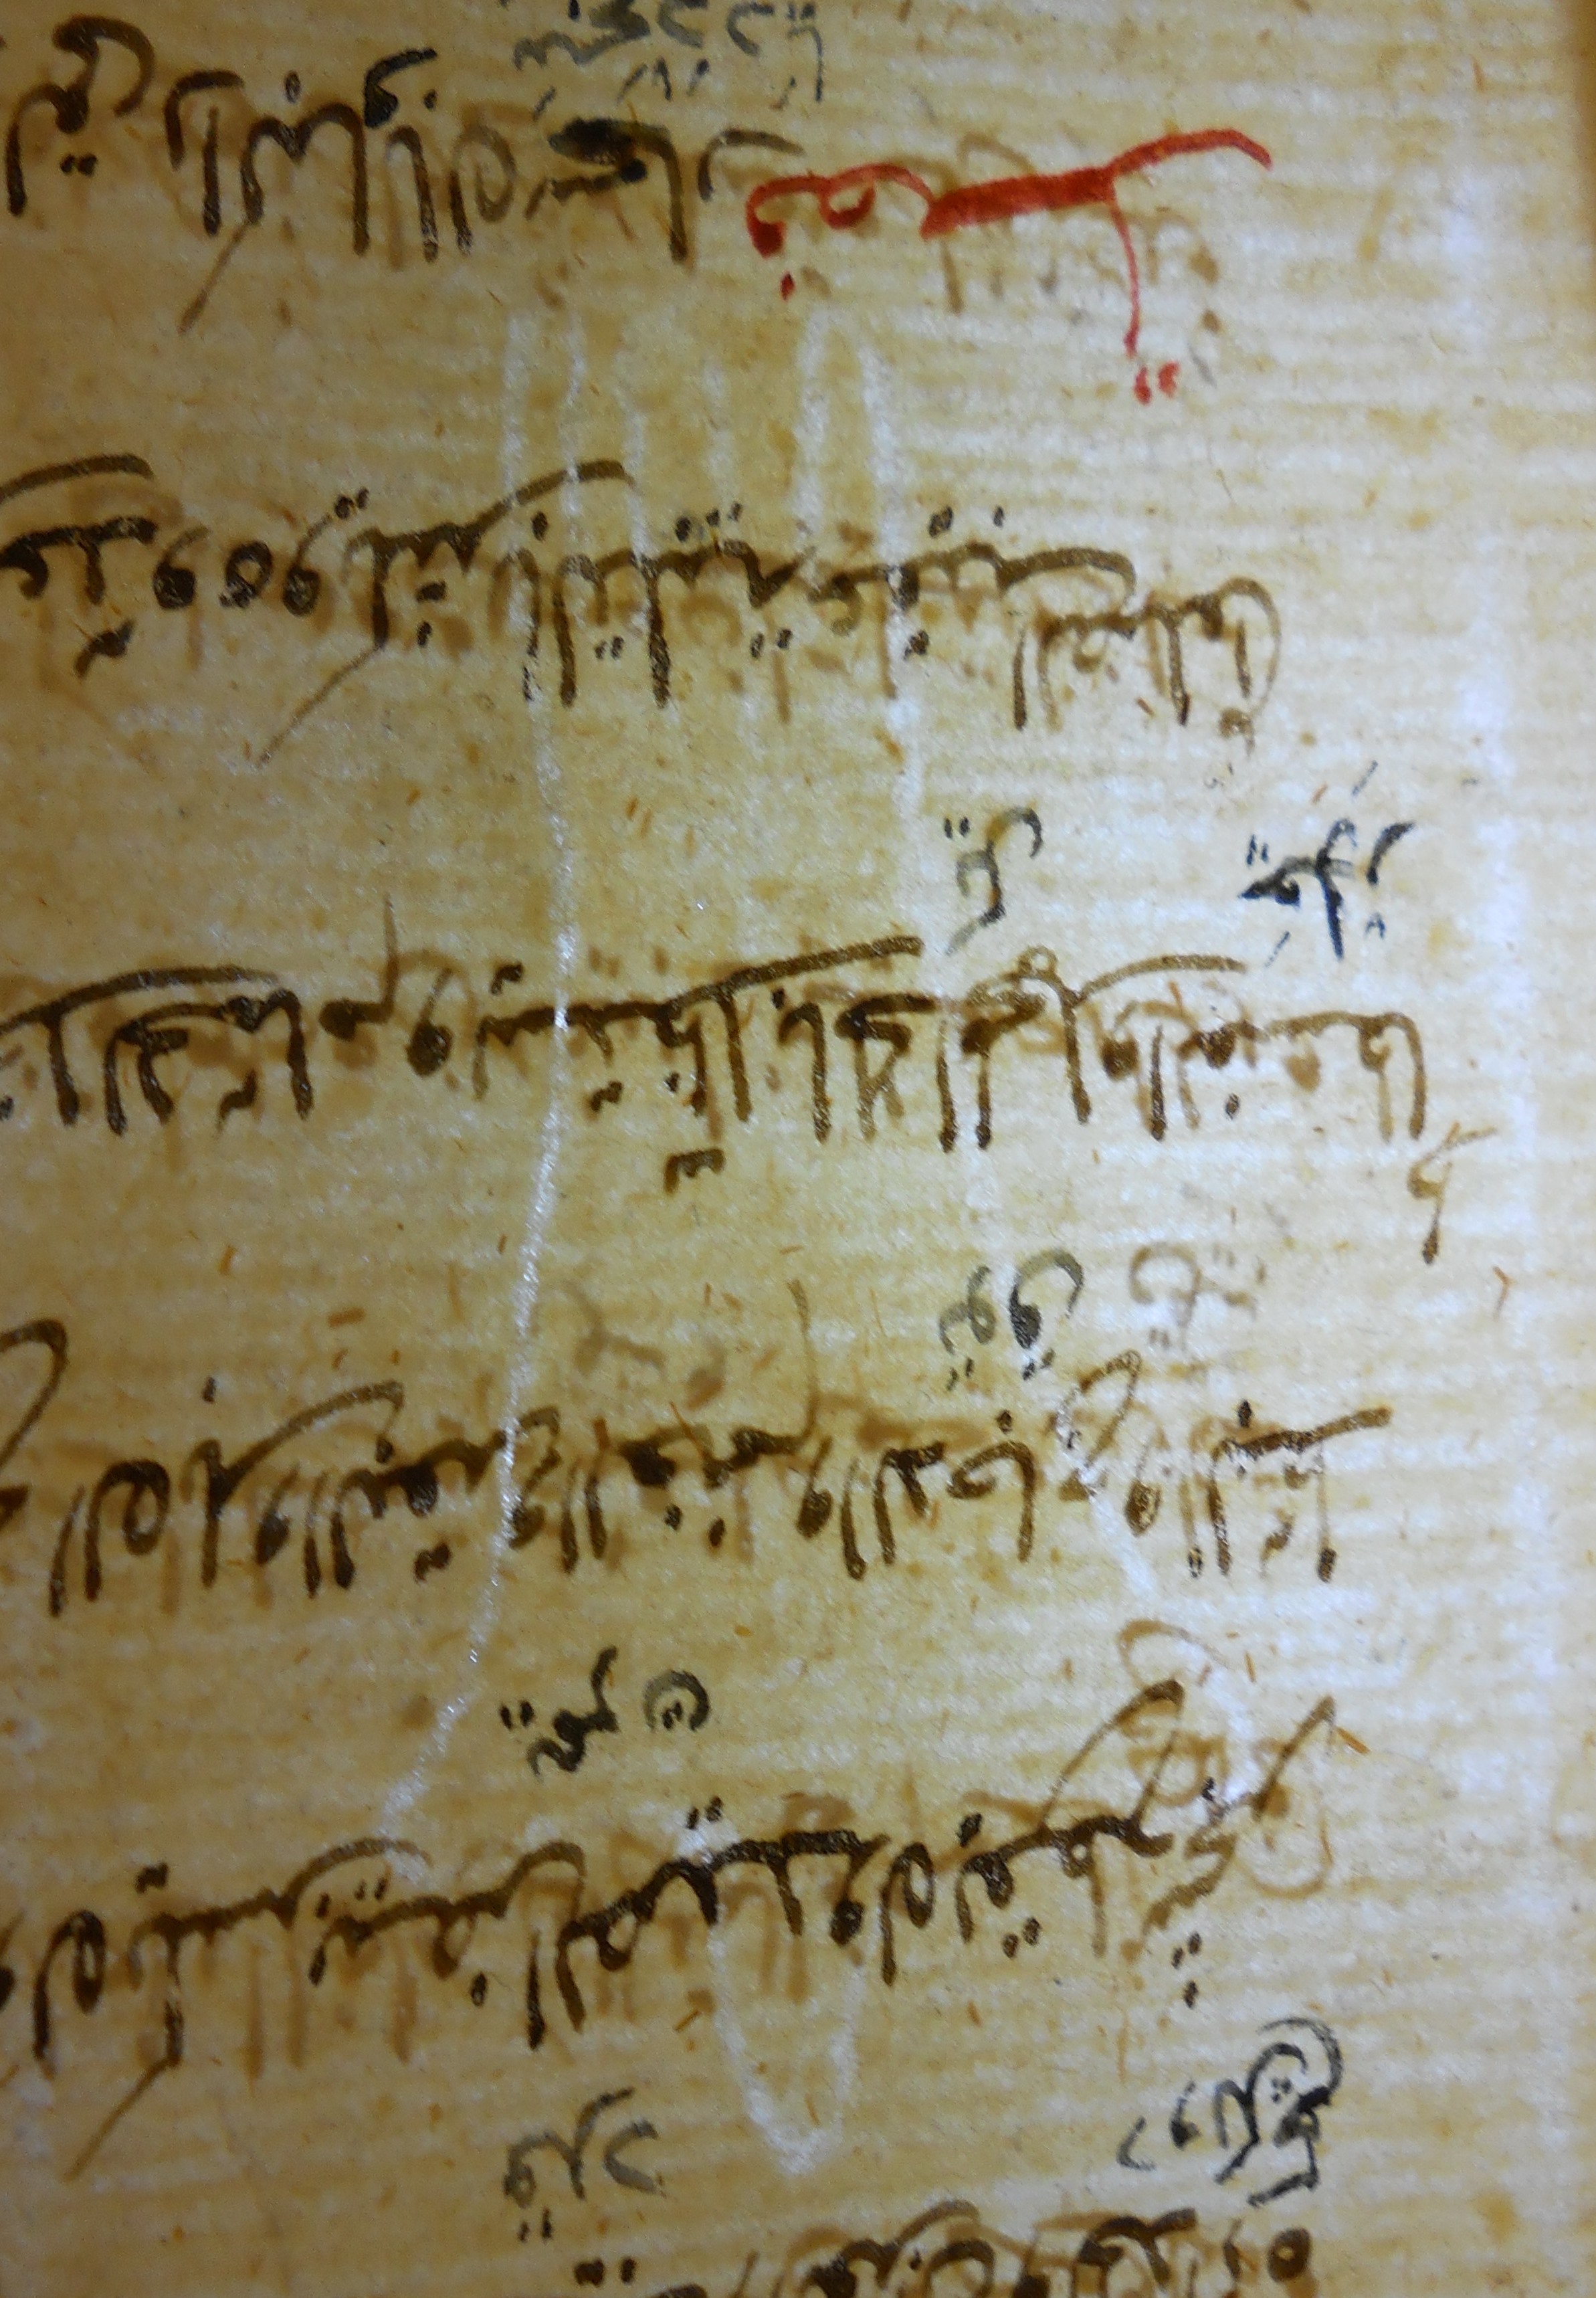 Watermark of what appears to be tower with three merlons in Isl. Ms. 78